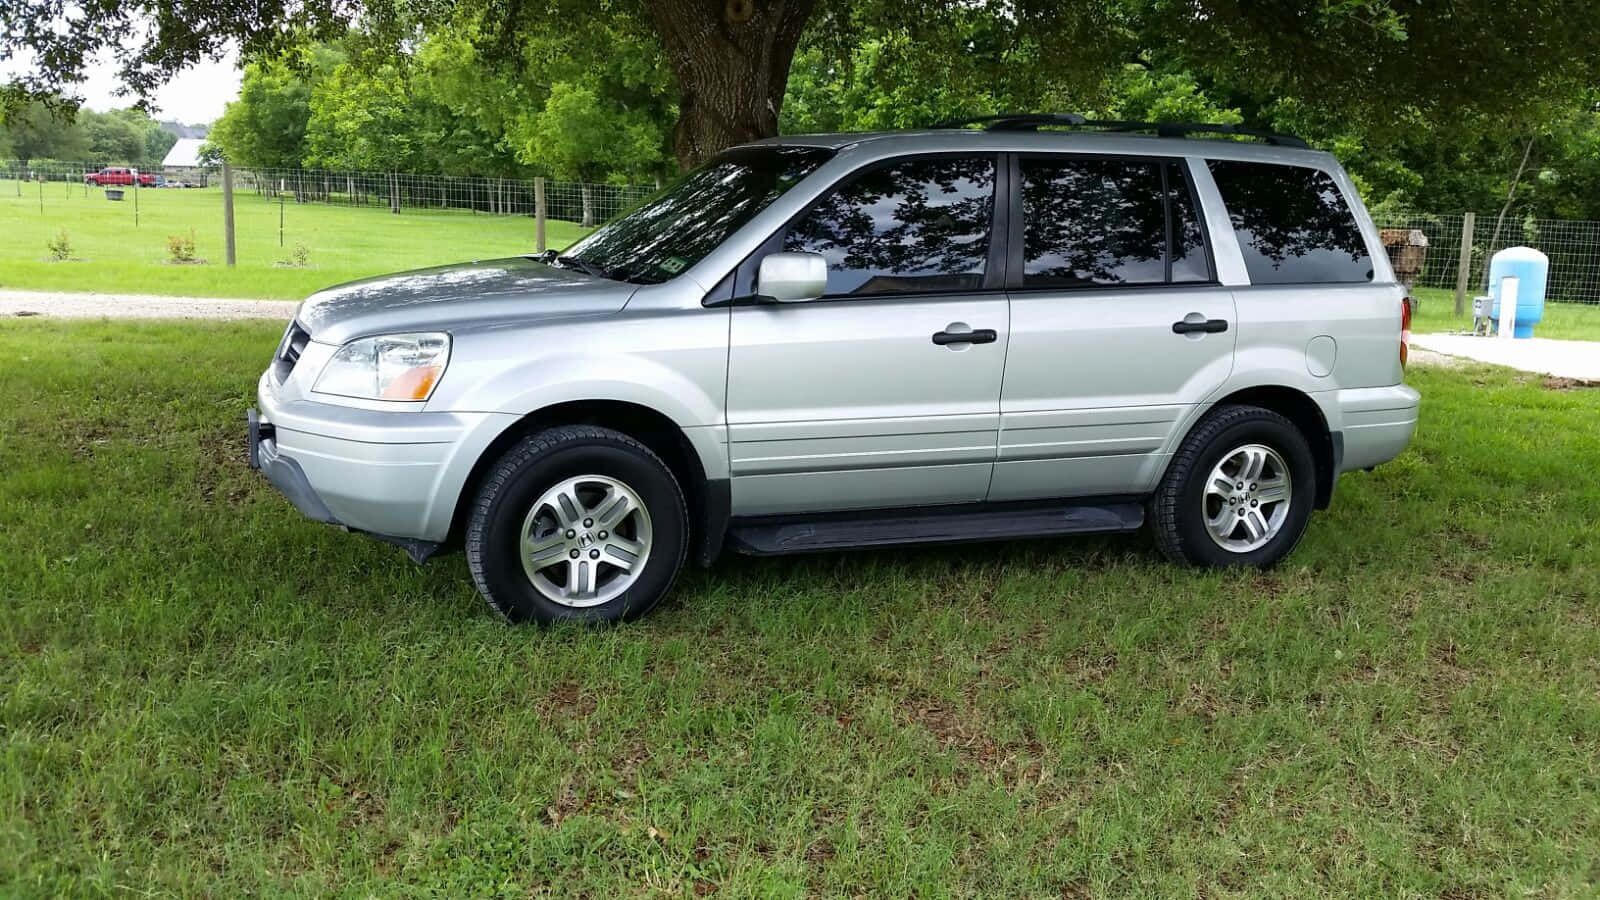 A Silver Suv Is Parked In A Grassy Area